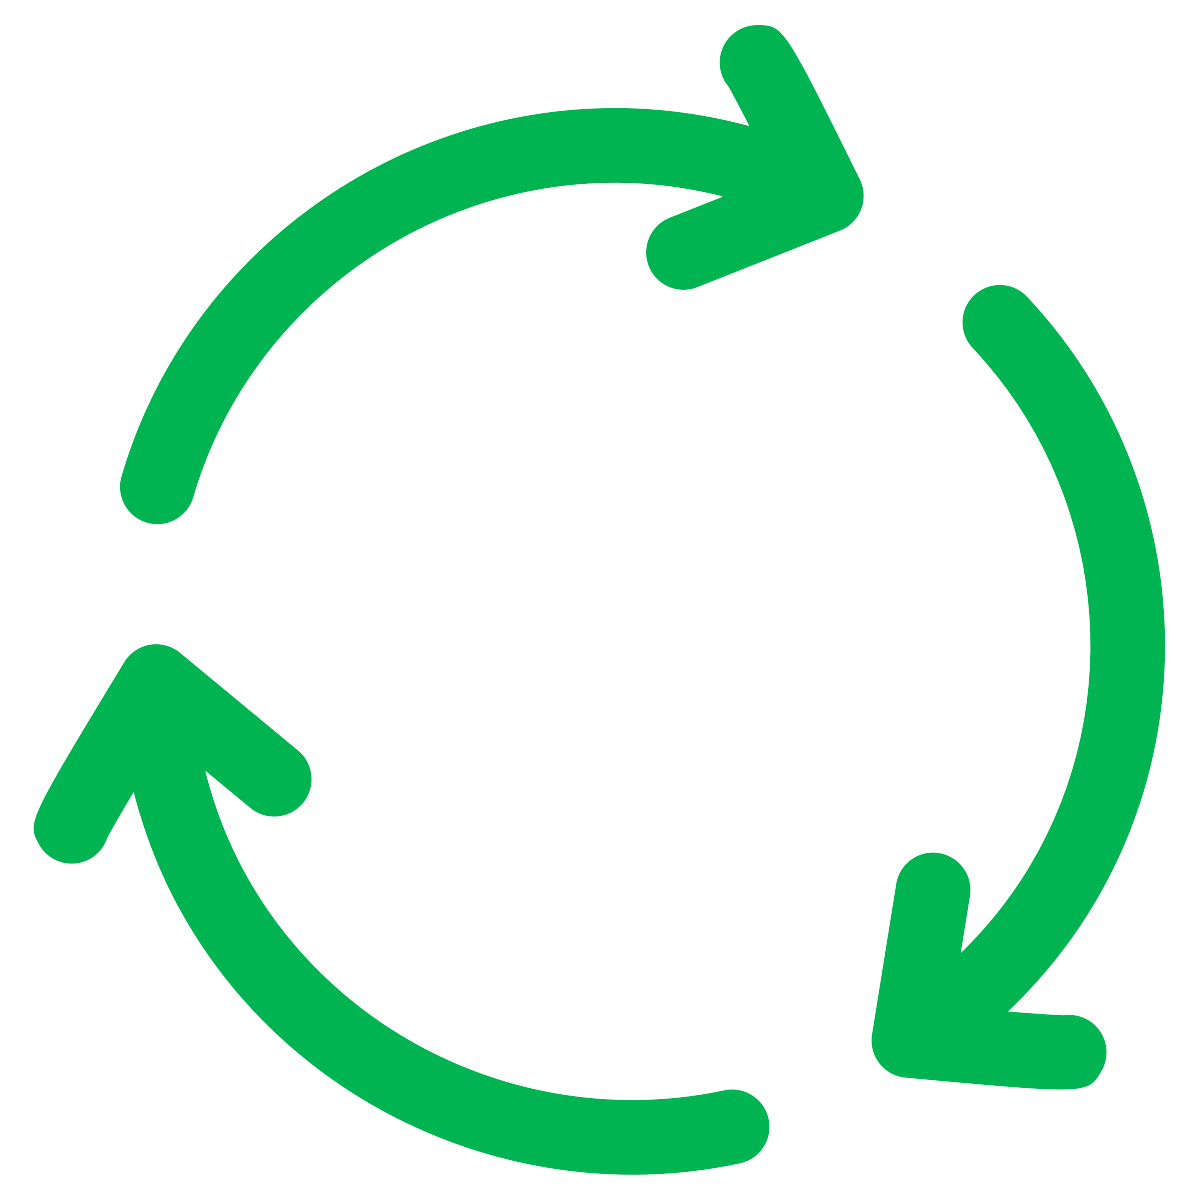 Recycling and Circular Economy